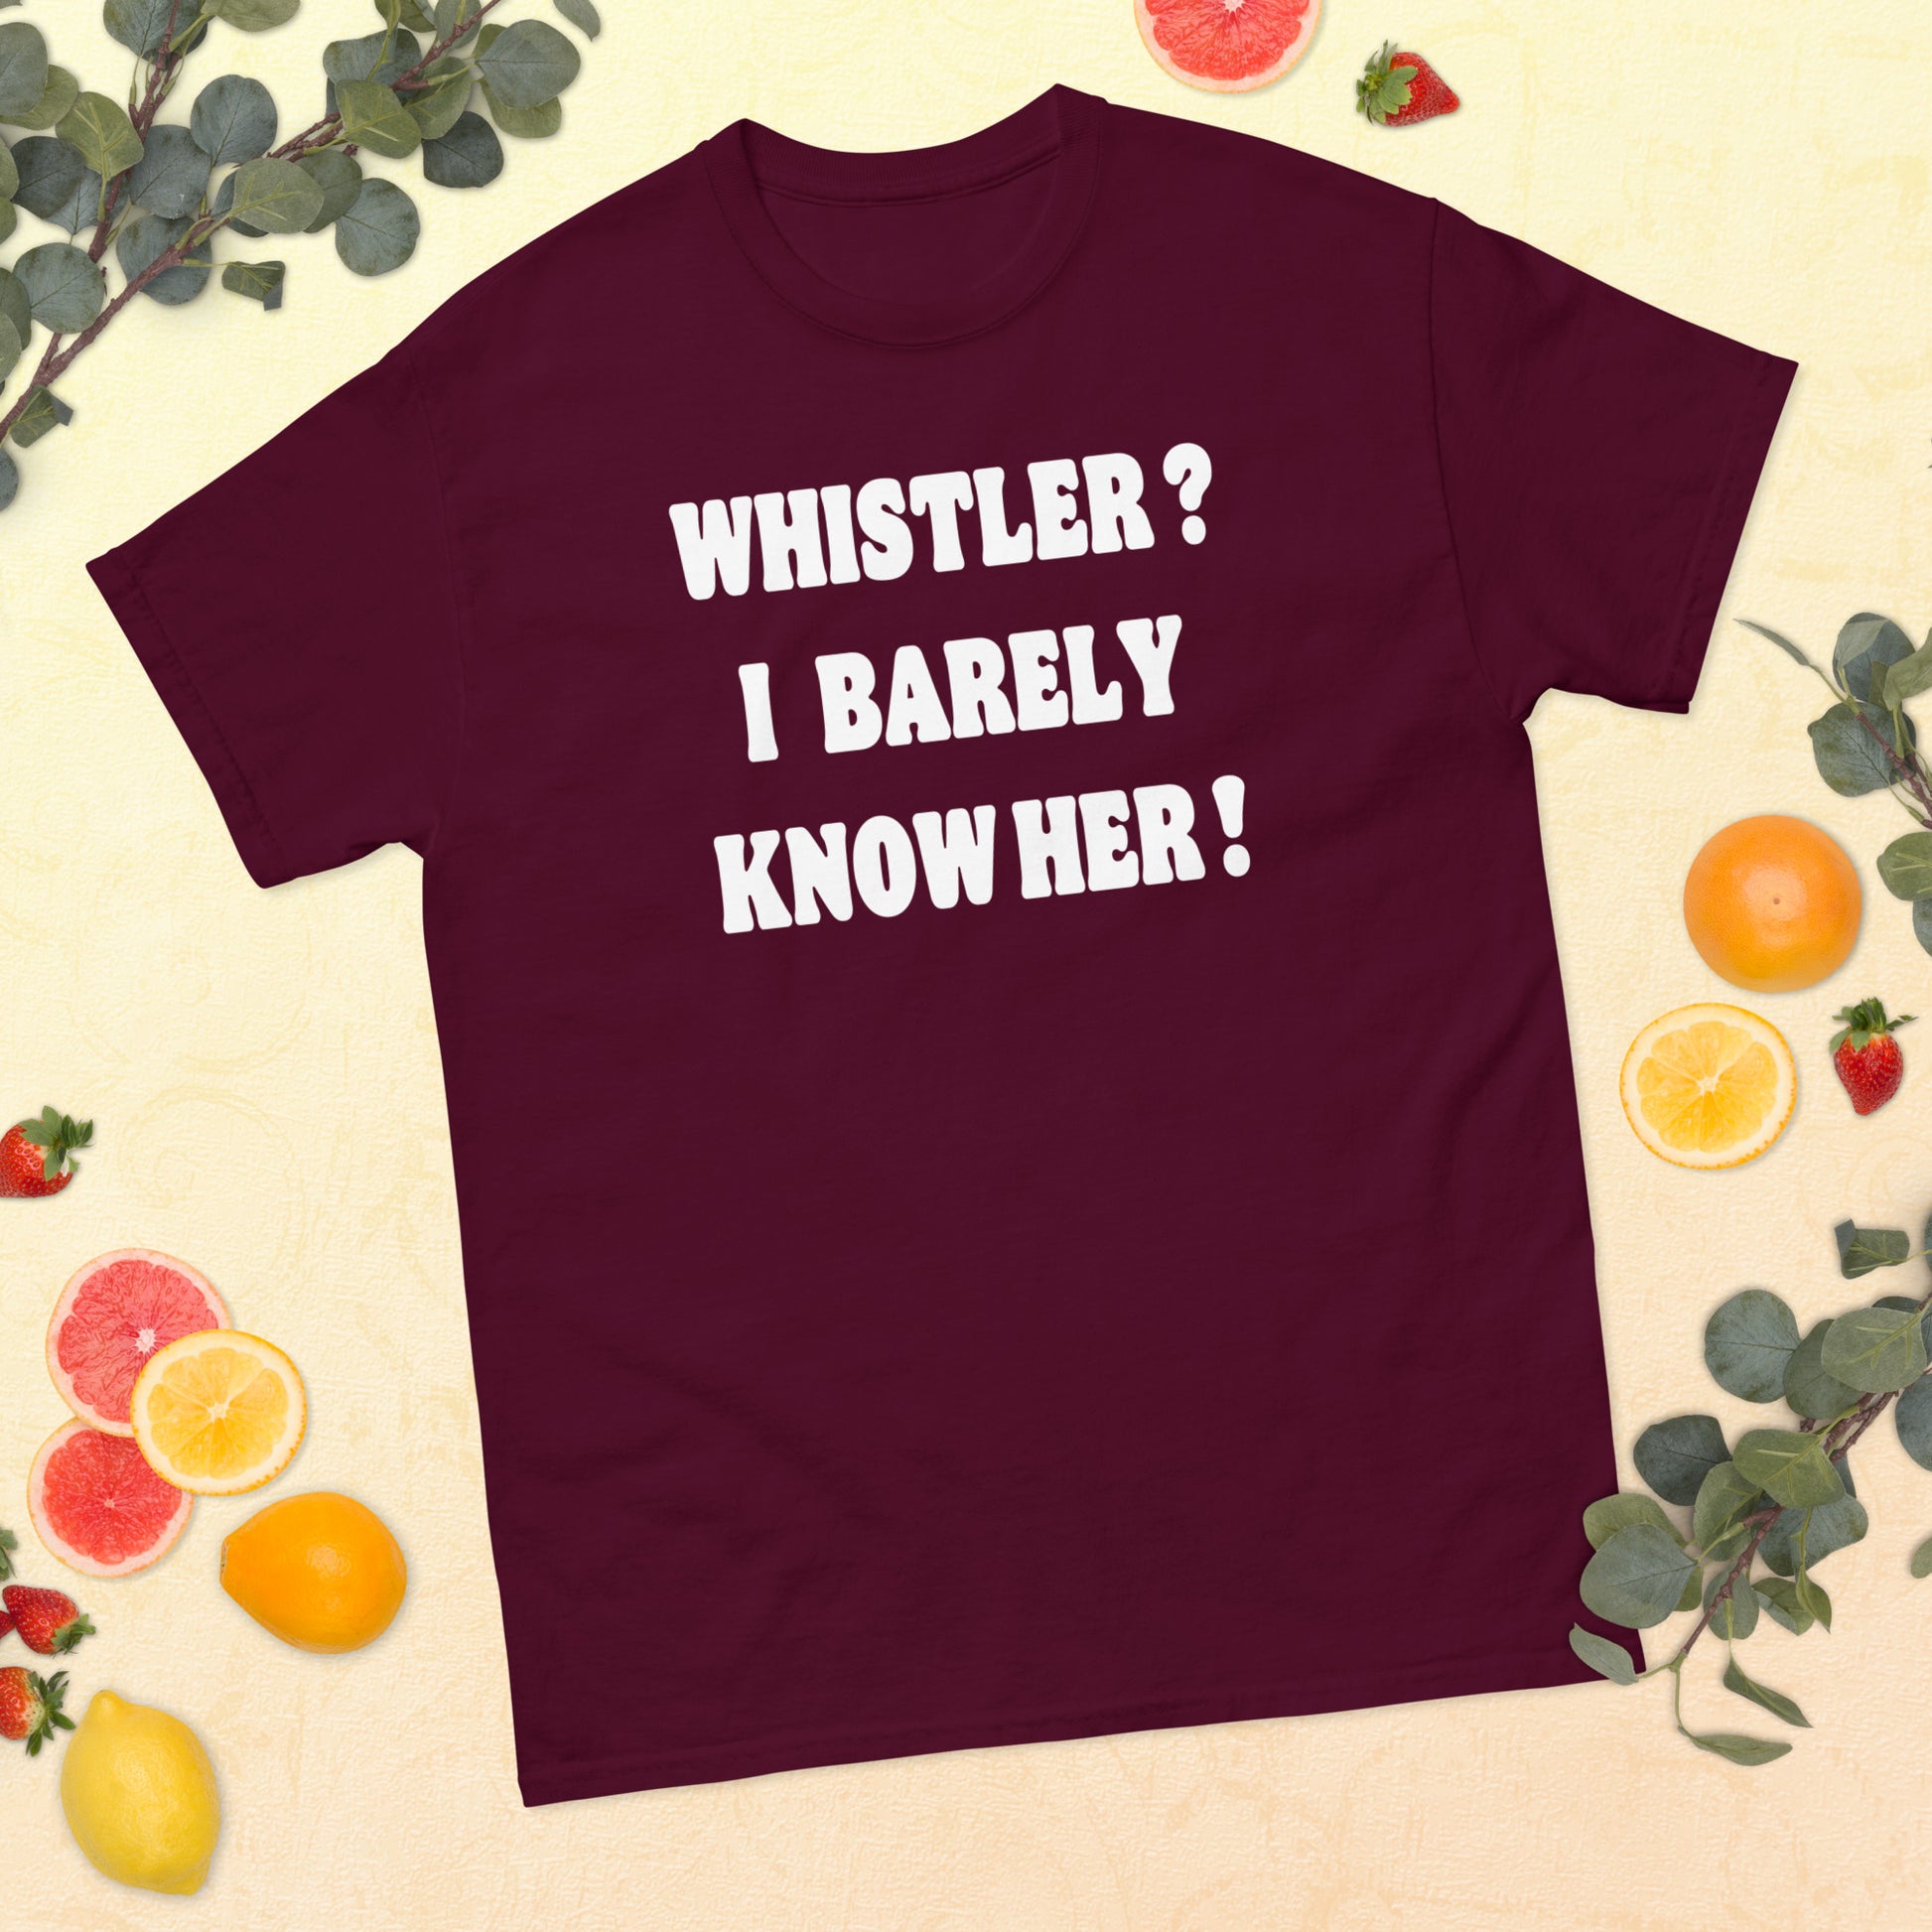 Whistler! I barely know her! Printed t-shirt by Whistler Shirts